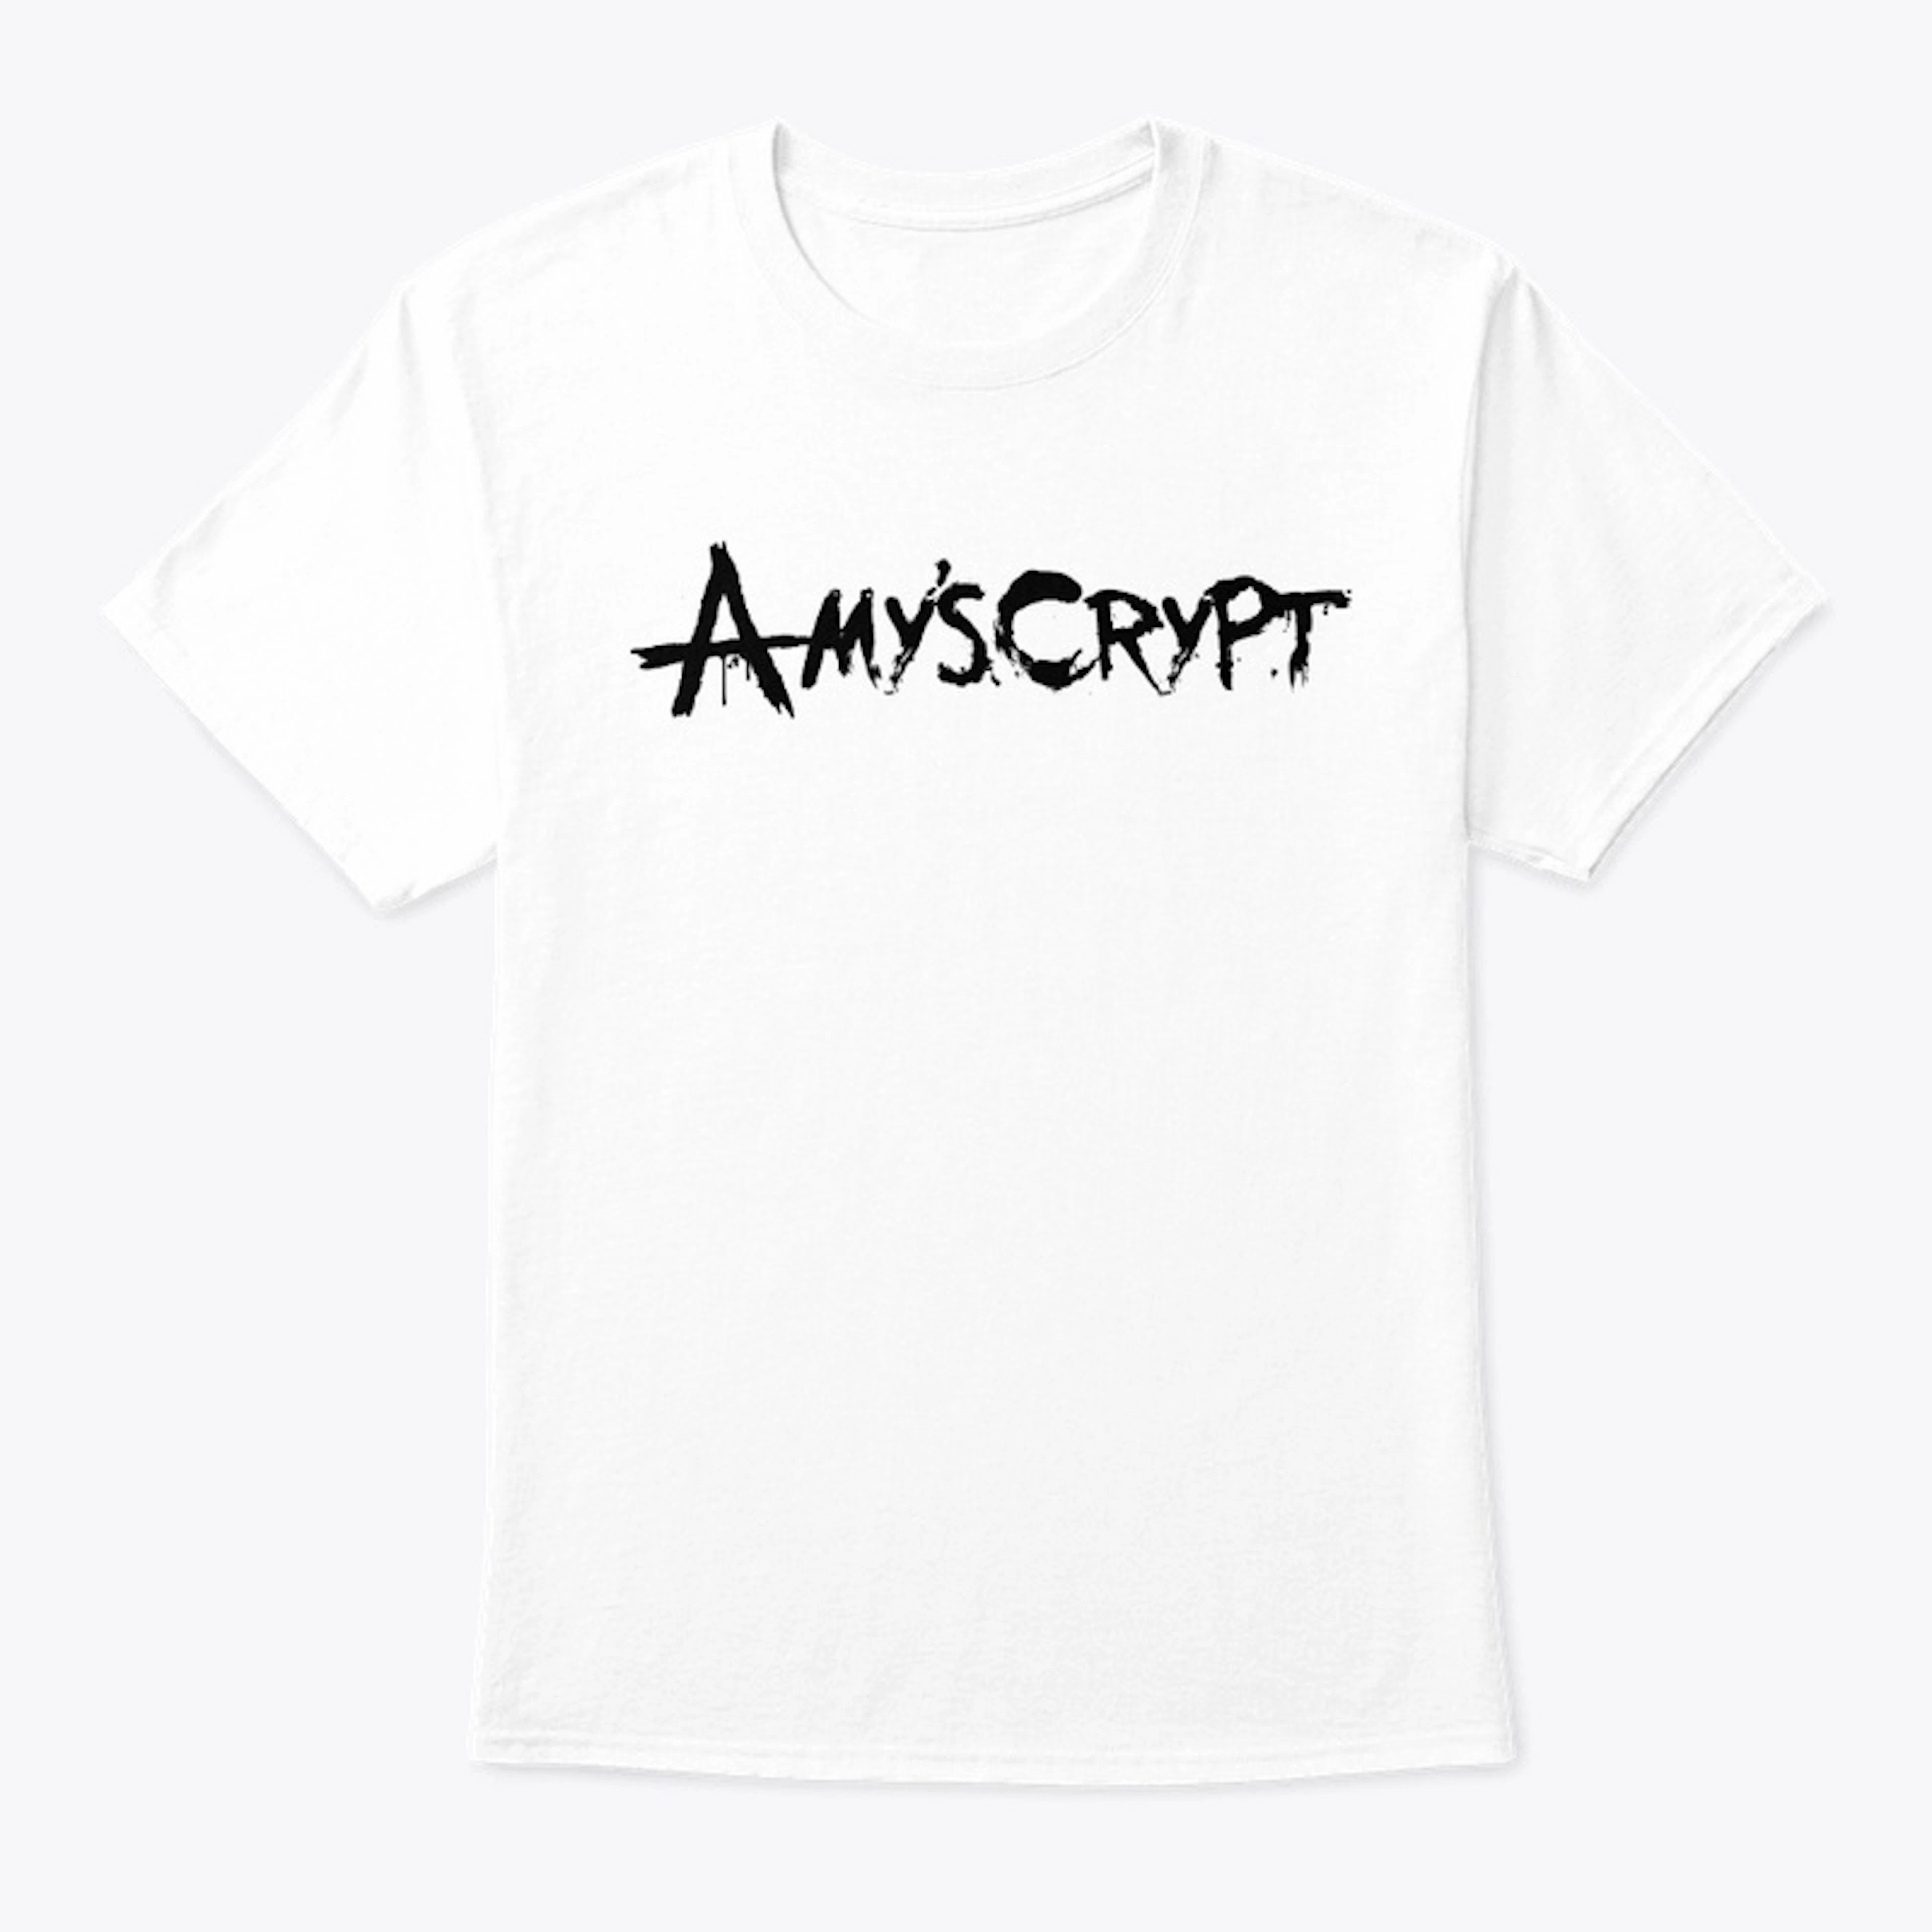 Amy's Crypt Adult's White Tees